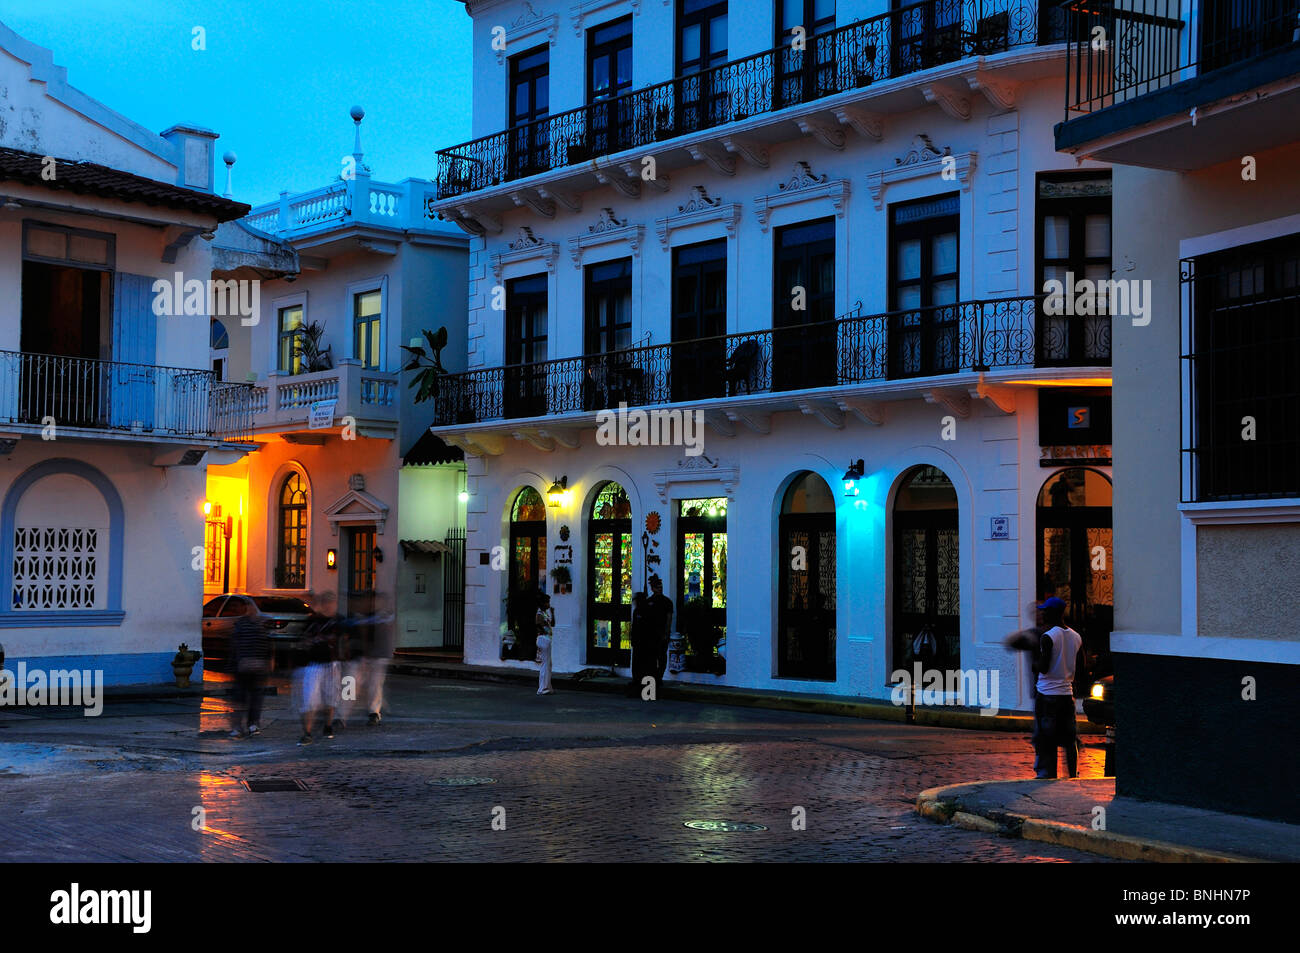 Panama Casco Antiguo Historic Town Panama City Central America old town houses dusk evening night lights Stock Photo